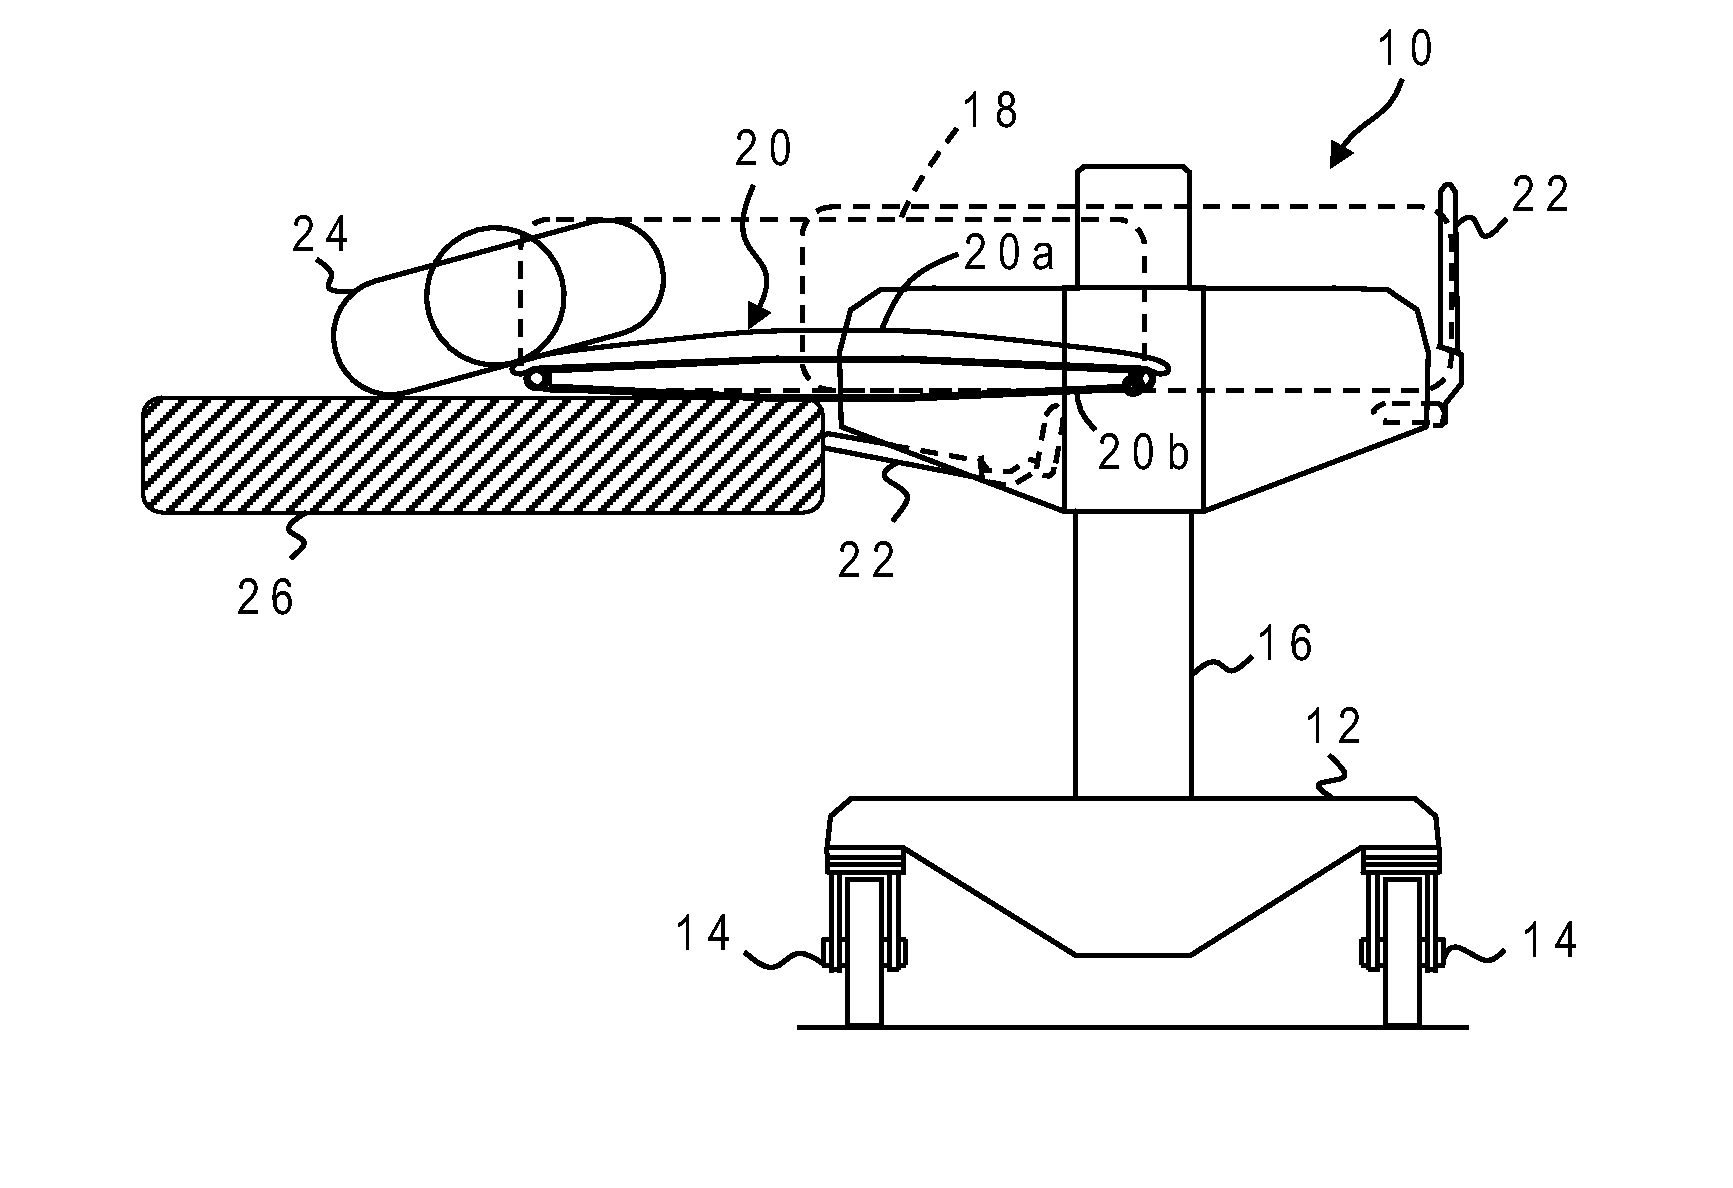 Table and slide assemblies for patient transfer device